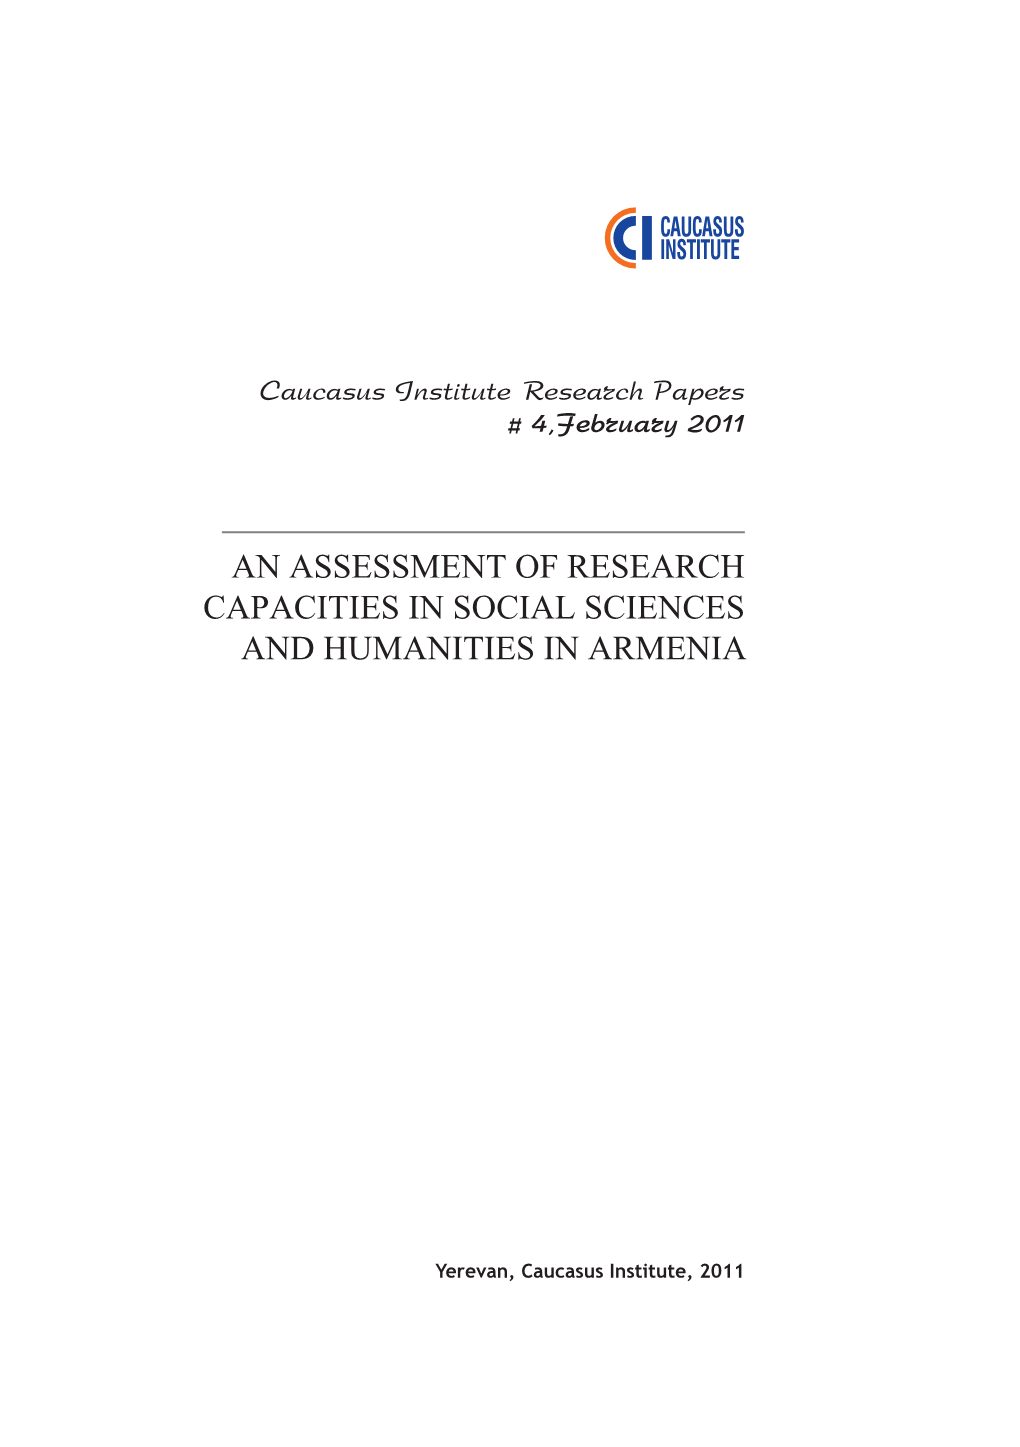 An Assessment of Research Capacities in Social Sciences and Humanities in Armenia